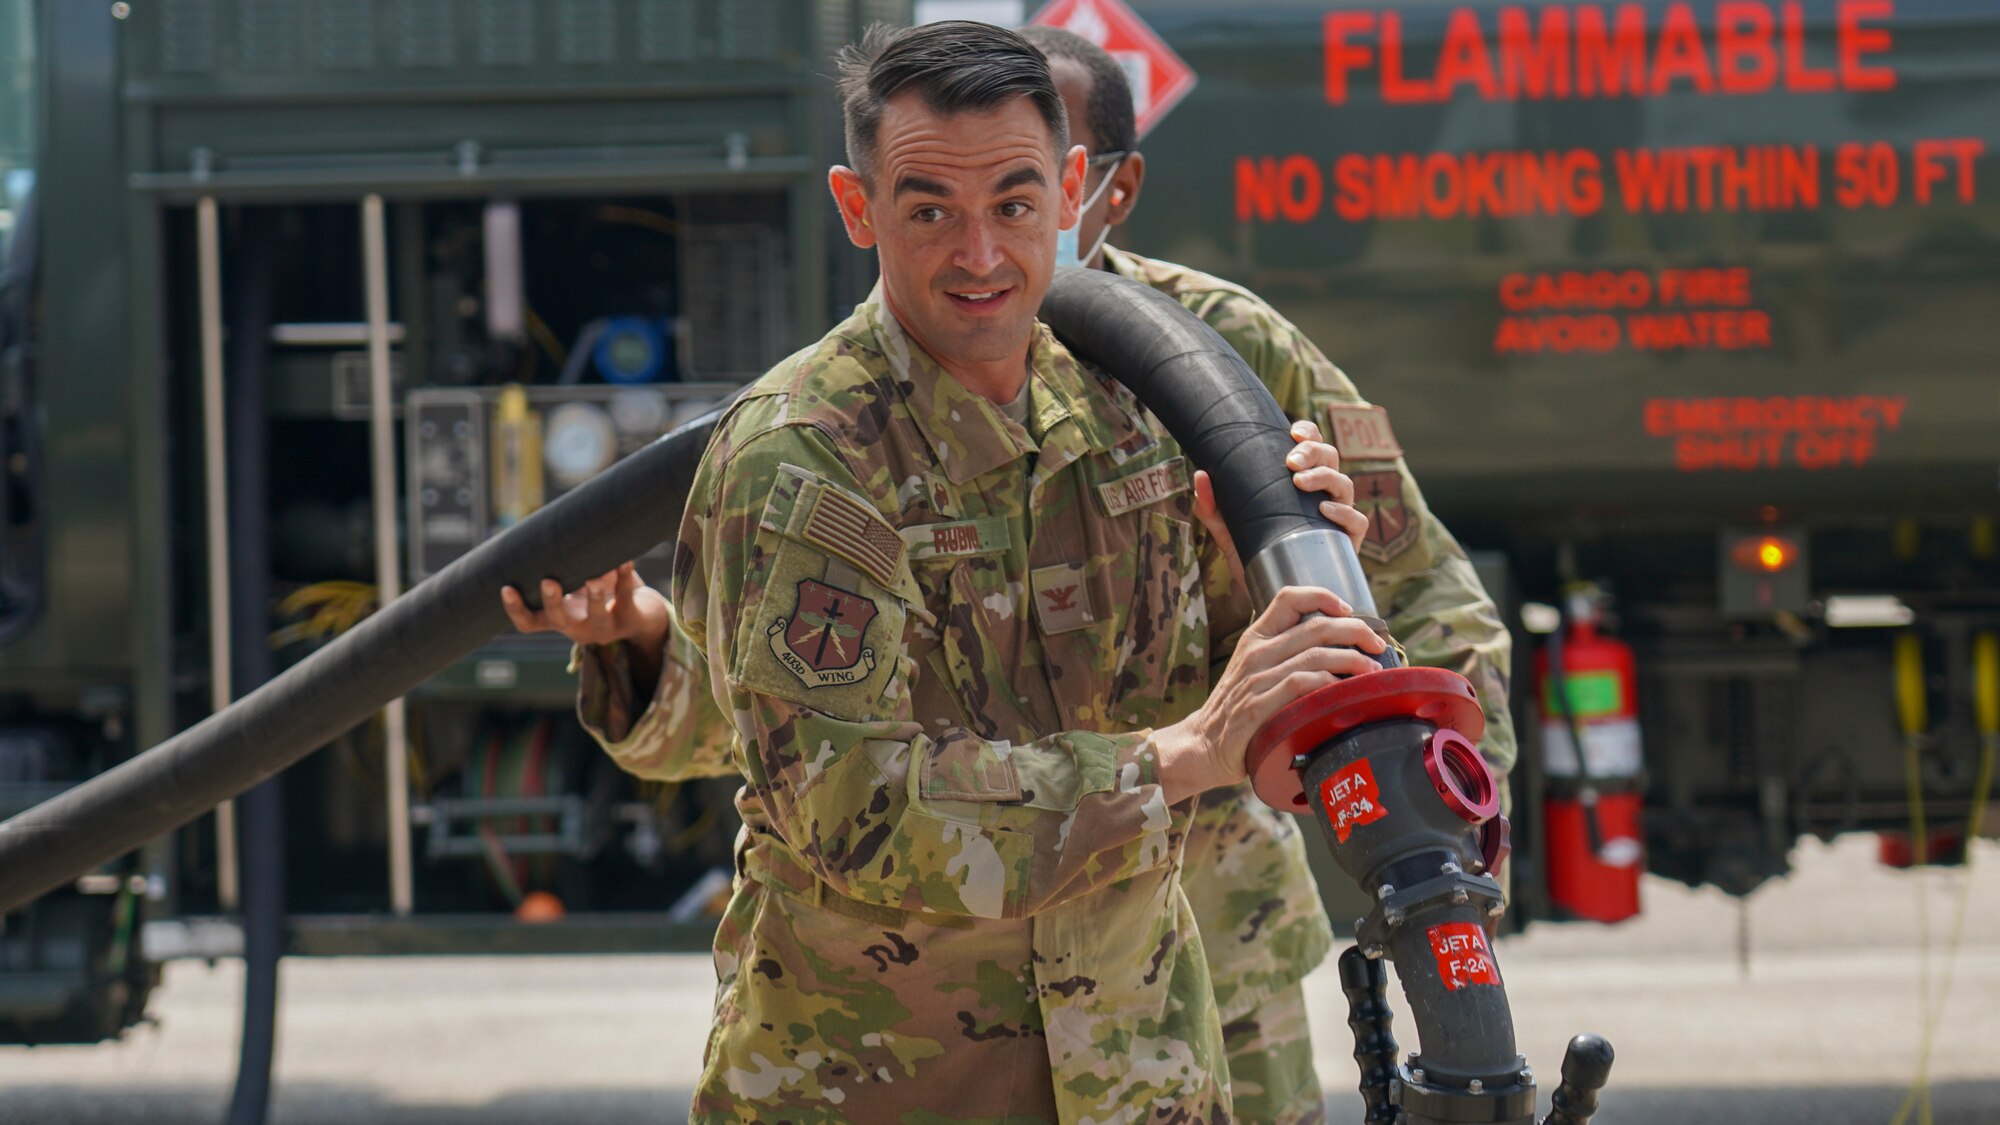 Col. Stuart M. Rubio, 403rd Wing commander, assists Tech. Sgt. Melvin Tucker, 403rd Logistics Readiness Squadron fuels operator, in carrying a hose from a fuel truck to a C-130J Super Hercules aircraft at Keesler Air Force Base, Miss., Aug. 7, 2021. Rubio met with the Reserve Citizen Airmen of the petroleum, oils and lubricants shop, aka POL, as part of his immersion tour with the 403rd LRS. (U.S. Air Force photo by 2nd Lt. Christopher Carranza)